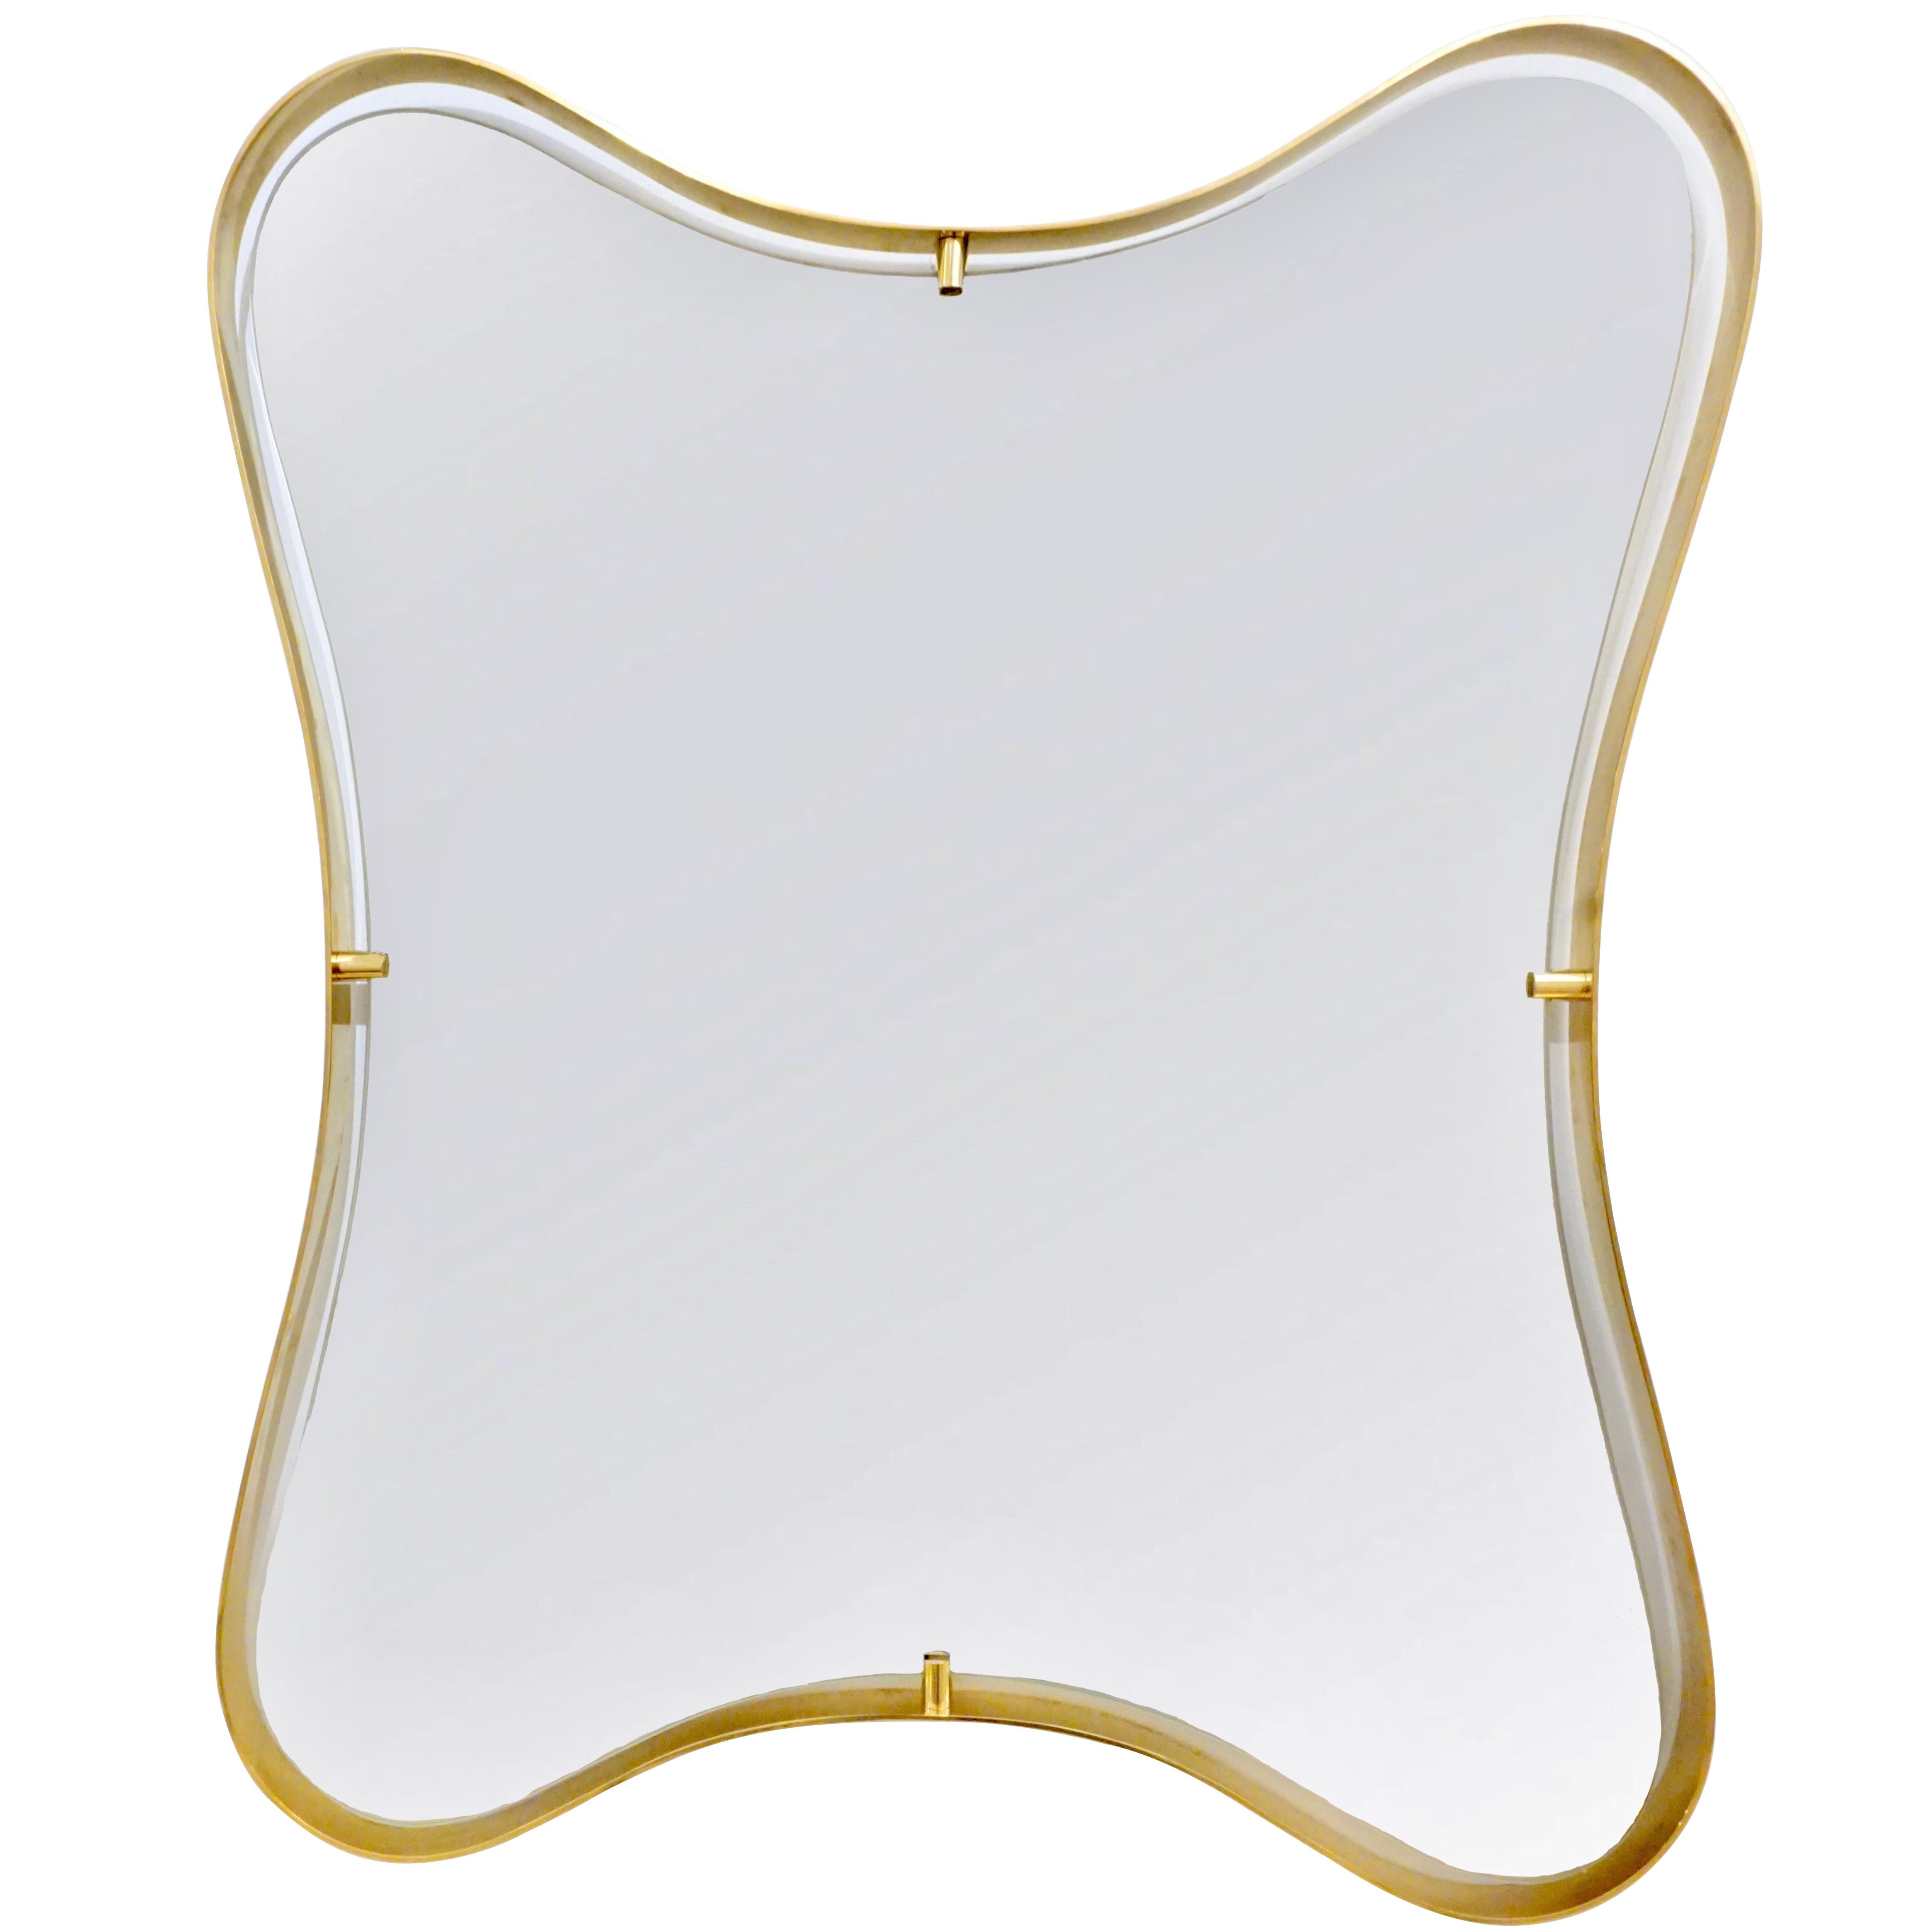 Contemporary Italian Minimalist Brass Mirror with Organic Curved Frame For Sale